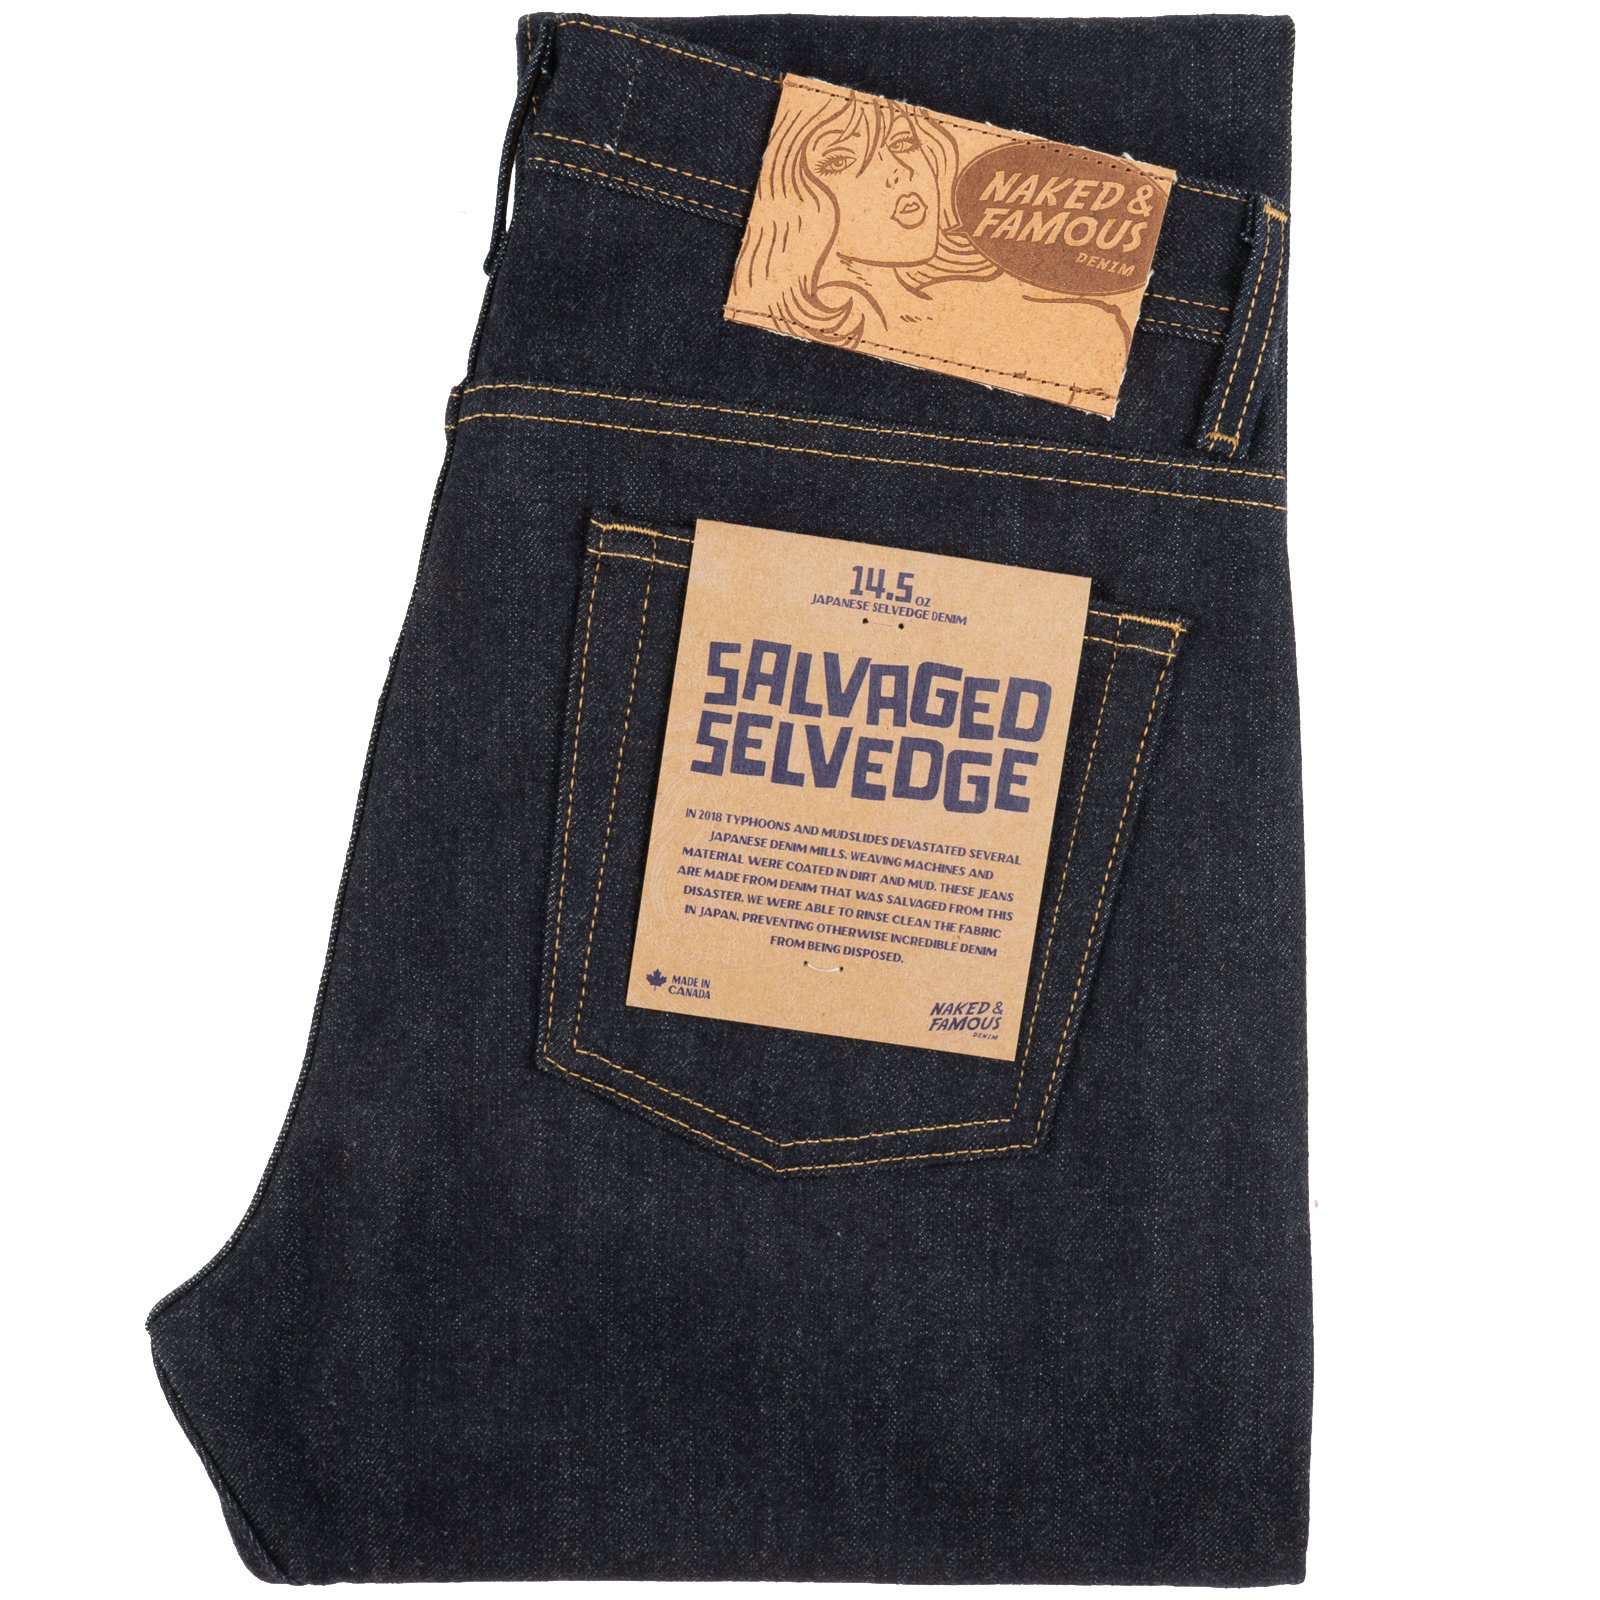  Salvaged Selvedge jeans - folded 